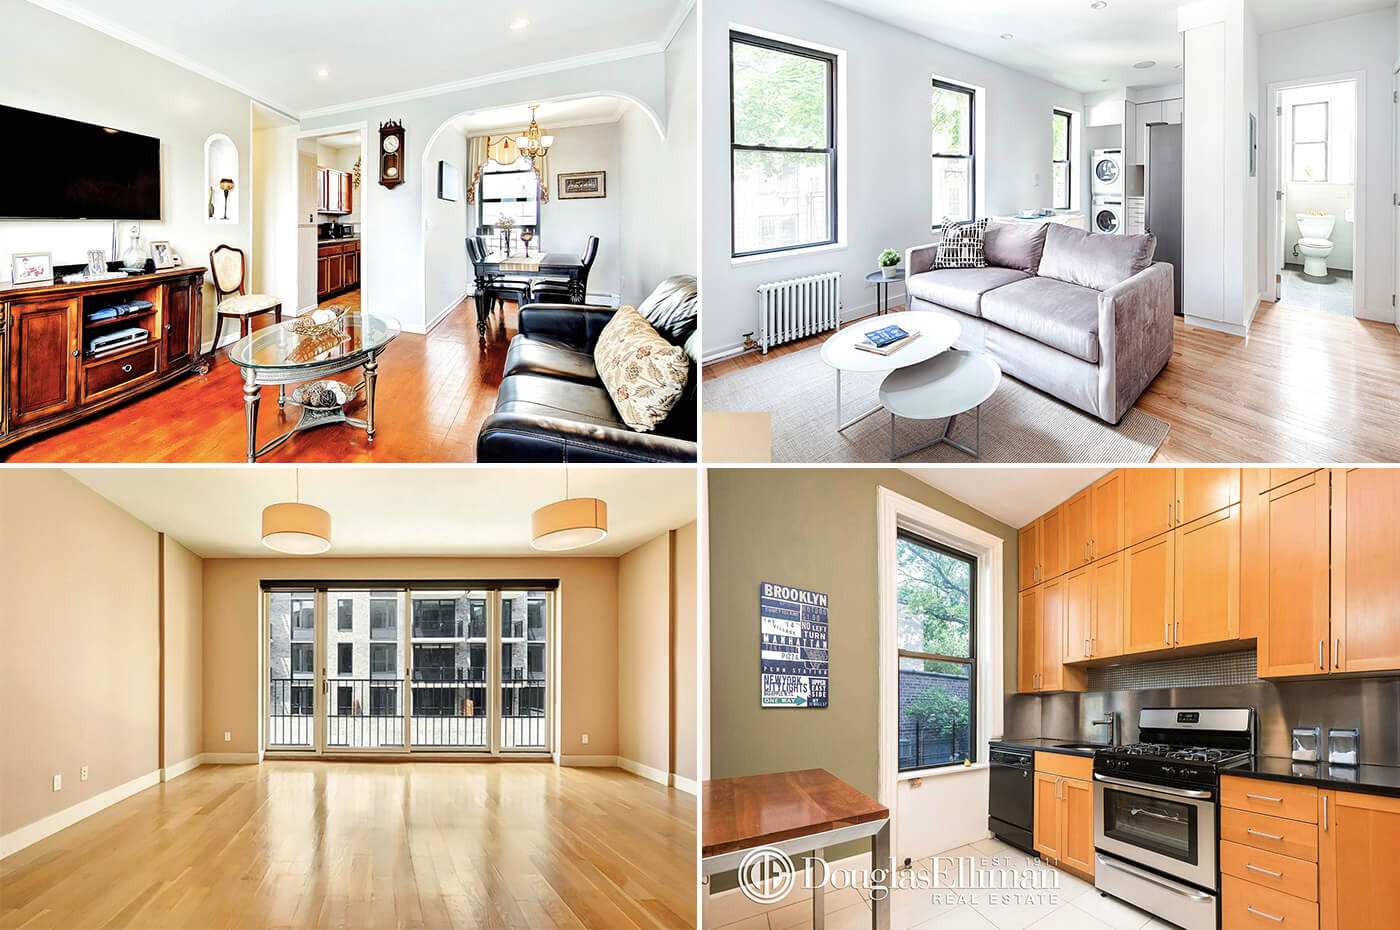 Brooklyn News Homes for Sale East Williamsburg Park Slope Prospect Heights Boeurm Hill